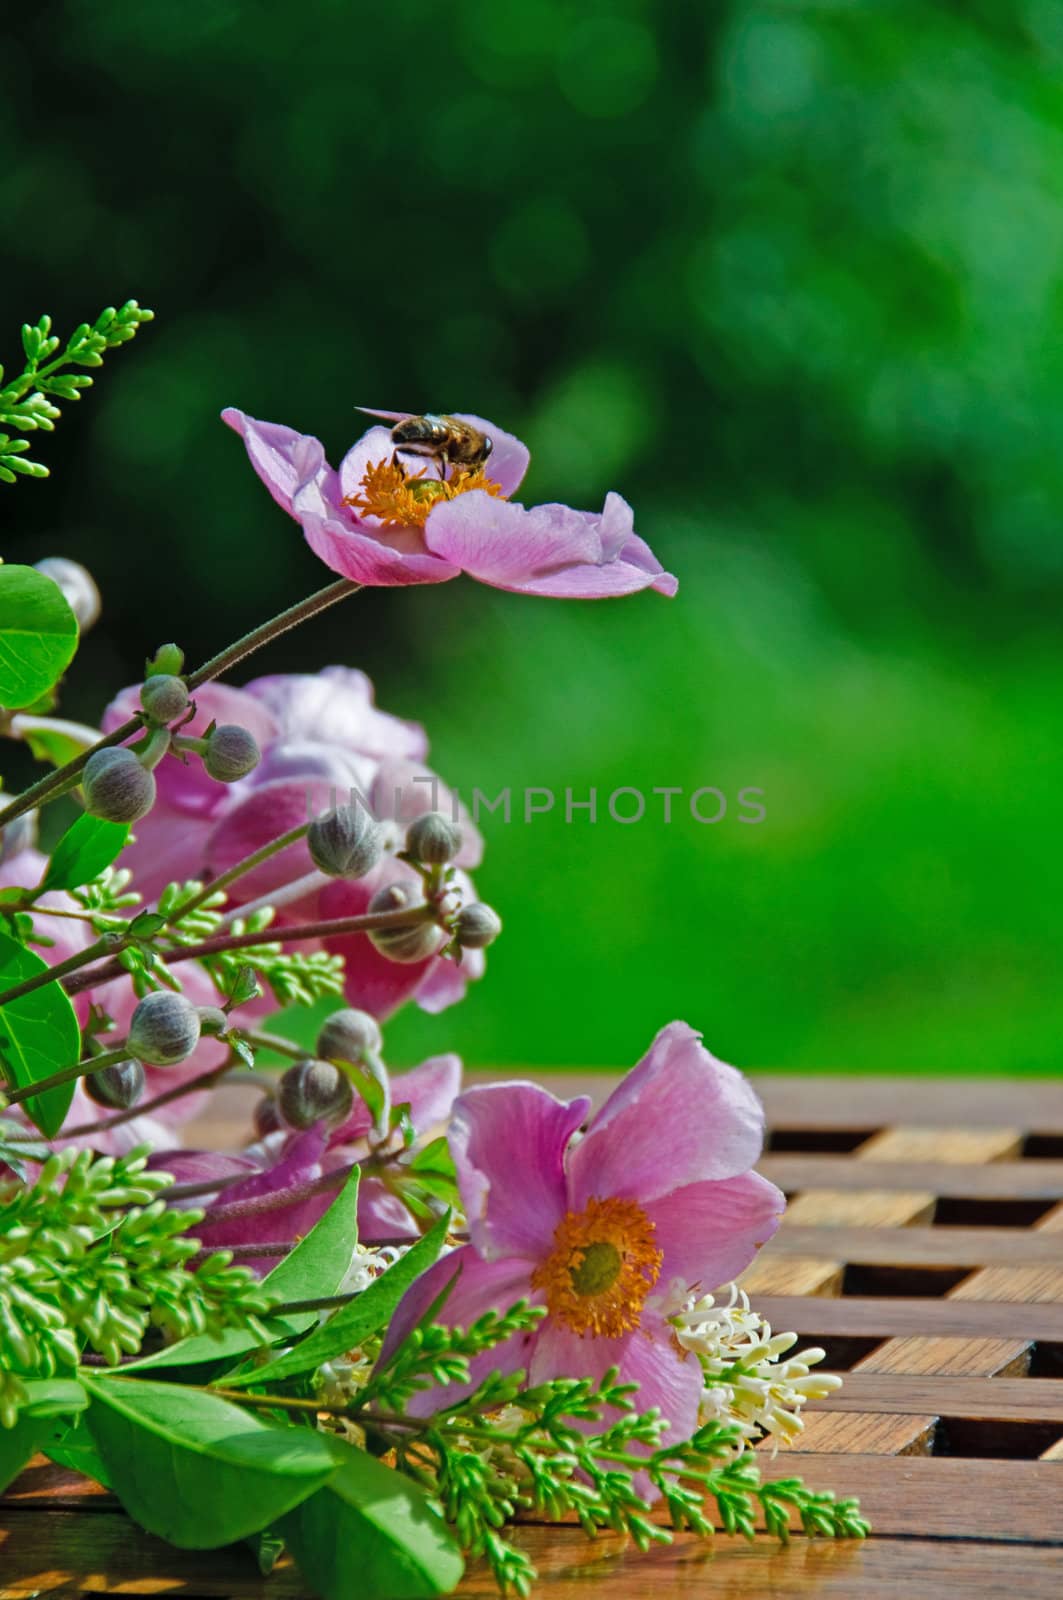 A bouquet of flowers lying on a garden table with a buzzing bee